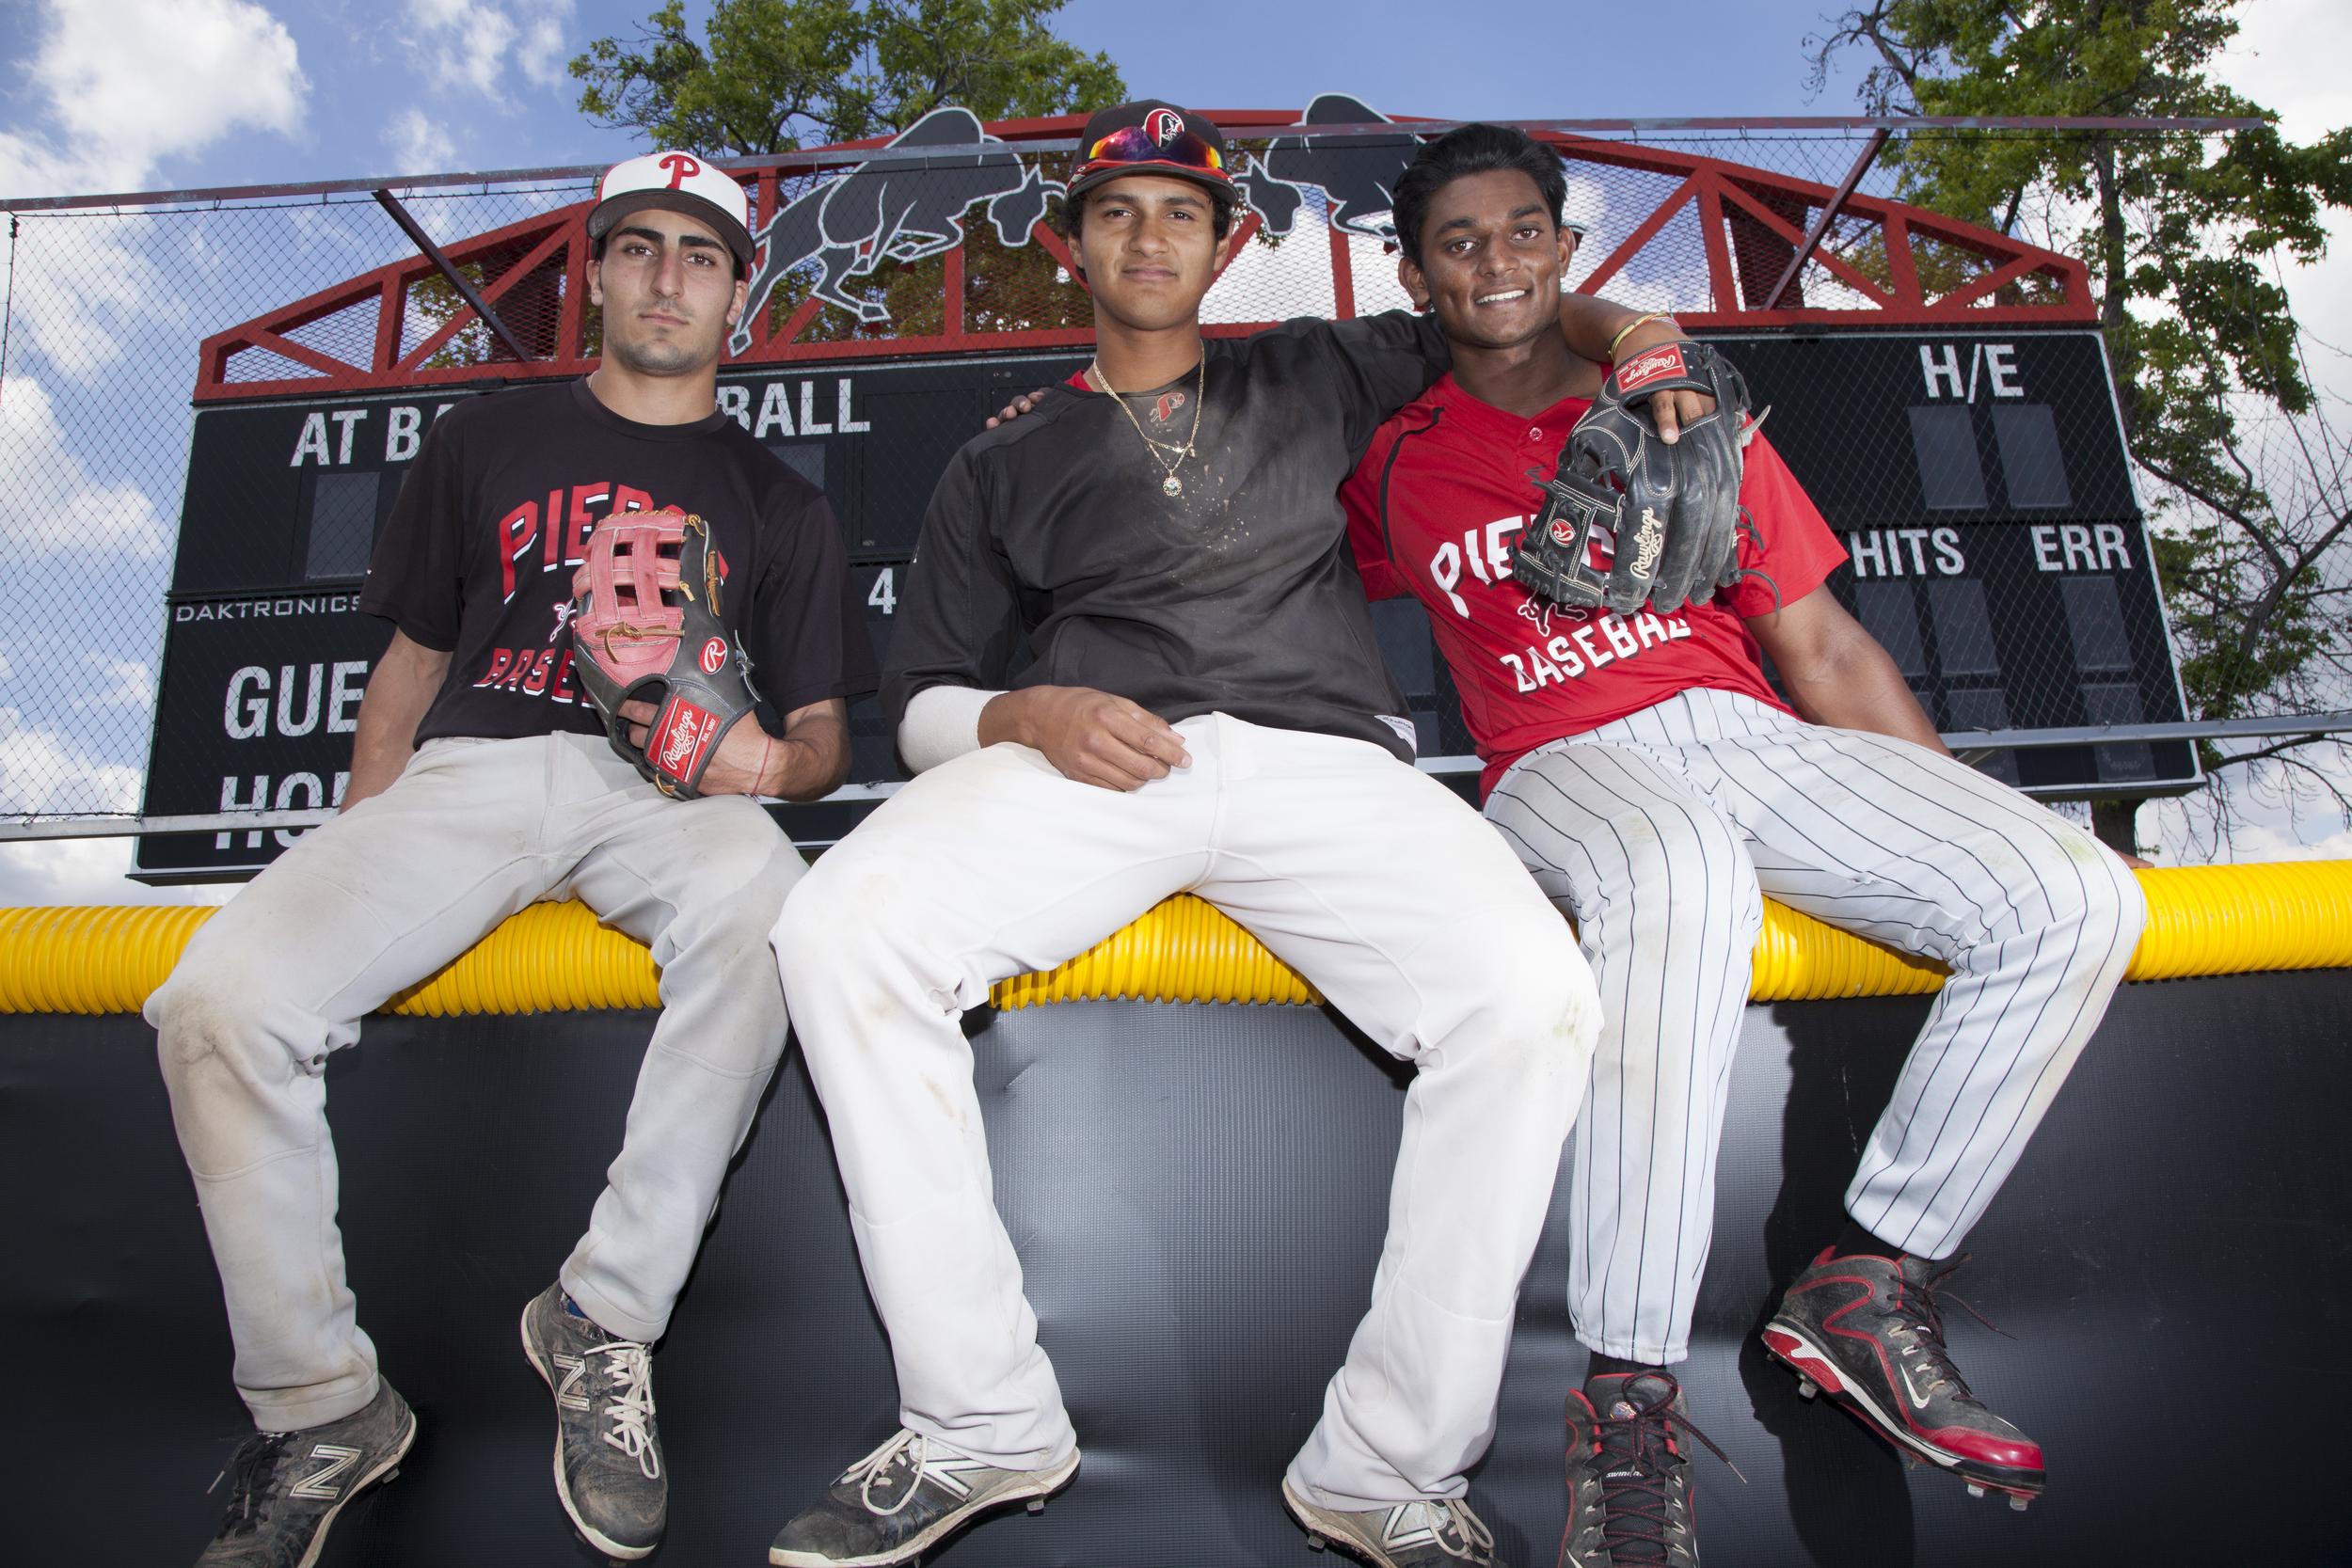  Trevor Dergazarian, Edgar Vela and Deion Fernando sit on top of the outfield wall of Joe Kelly Field in Woodland Hills, Calif. on Monday, April 11, 2016. 